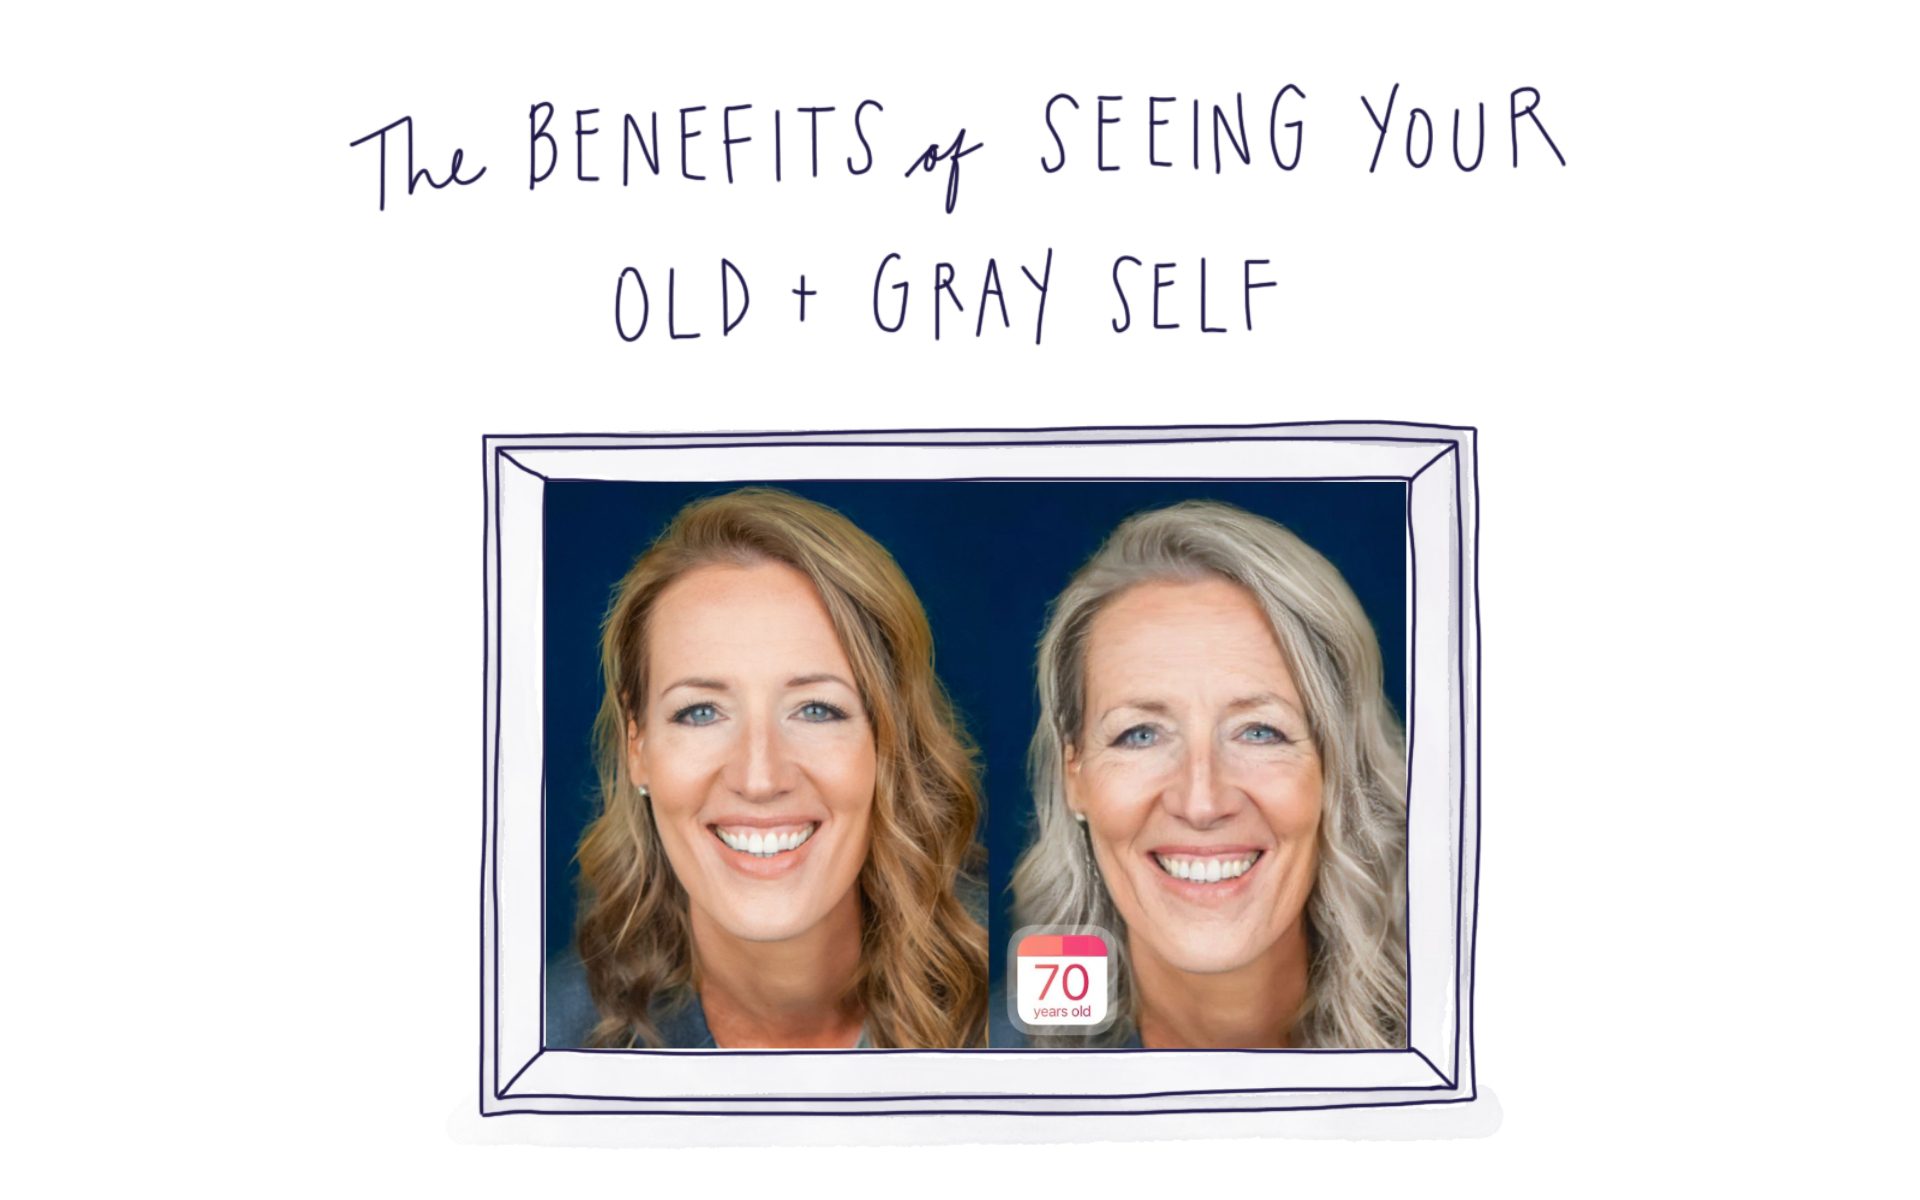 The Benefits of Seeing Your Old + Gray Self